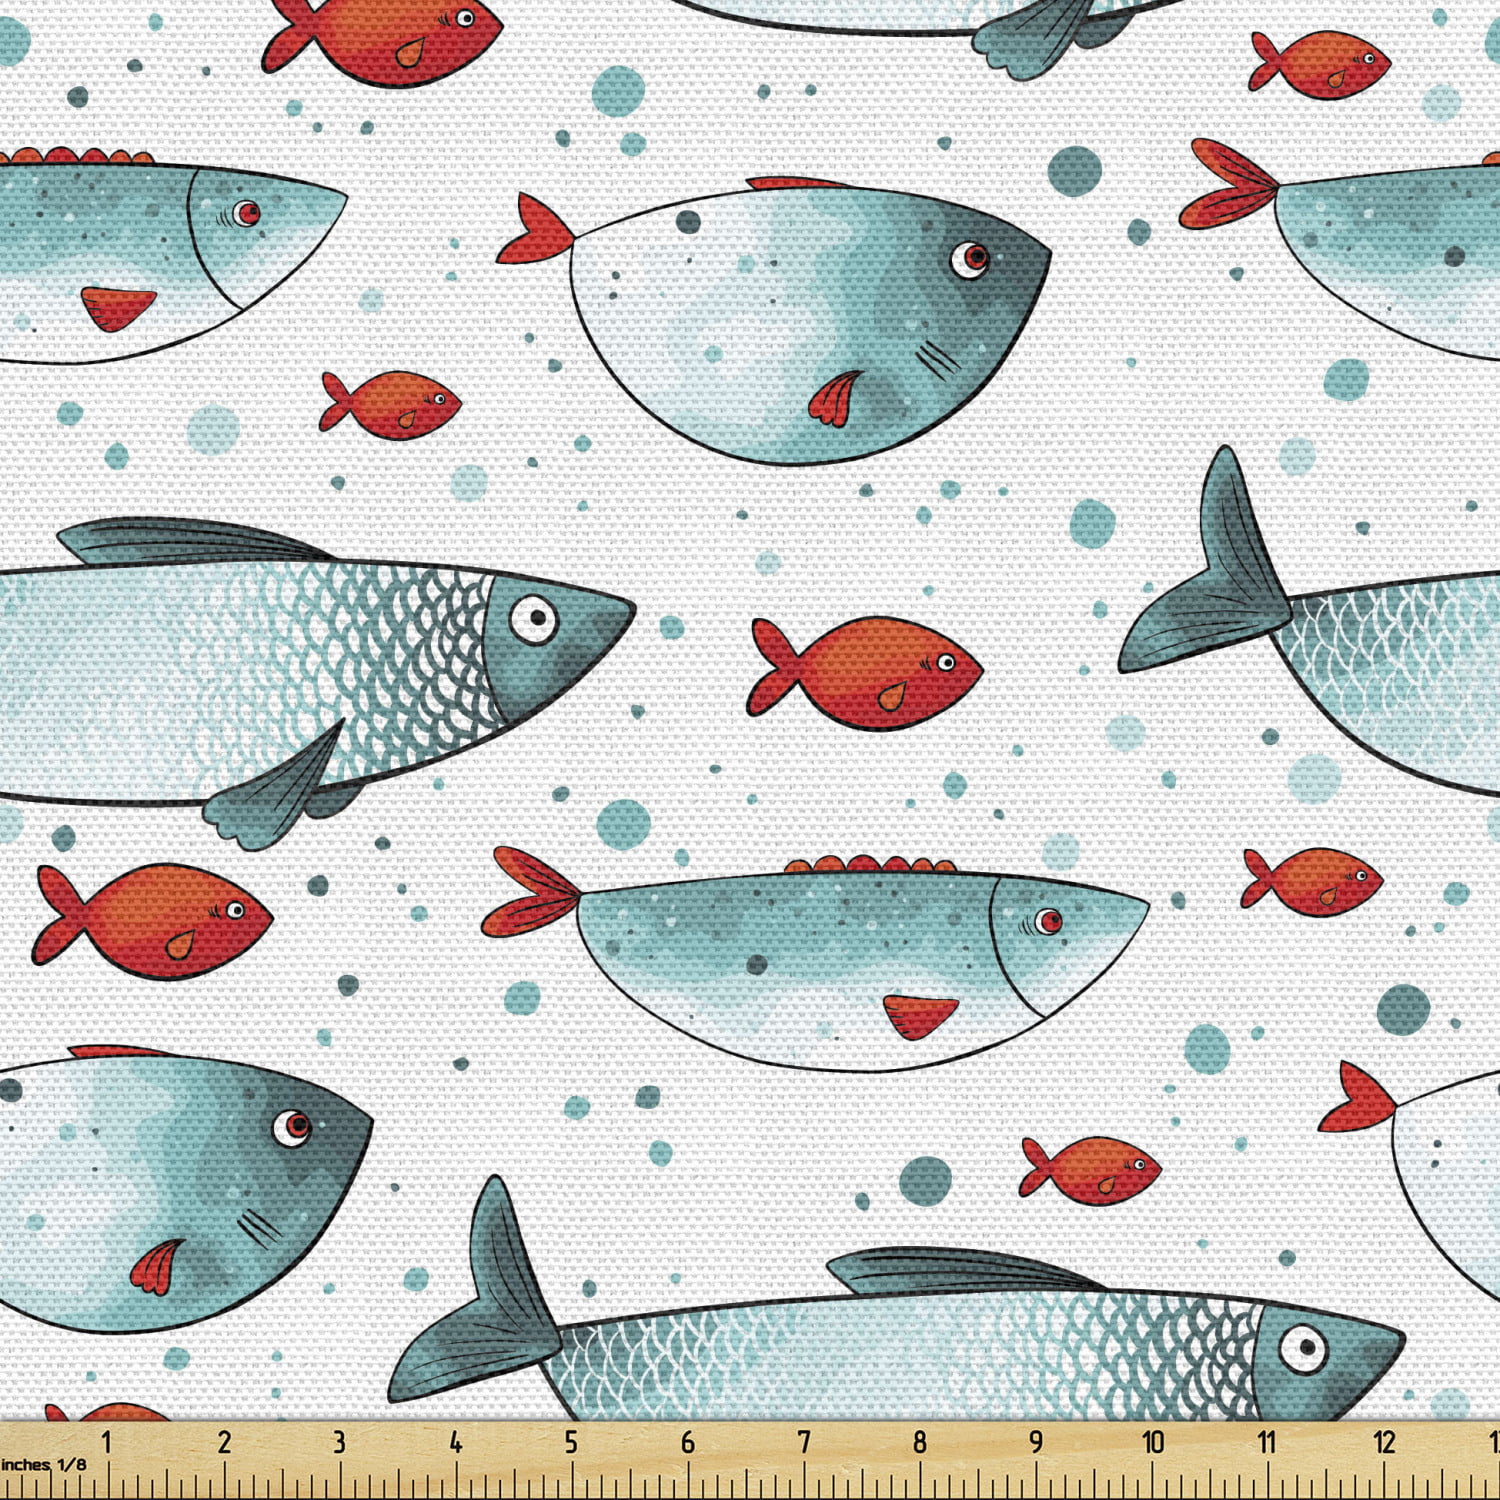 Fish Upholstery Fabric by the Yard, Subaquatic Animal Pattern on Dotted  Background Ocean Inhabitants with Scales, Decorative Fabric for DIY and  Home Accents, 2 Yards, Orange and Pale Blue by Ambesonne 